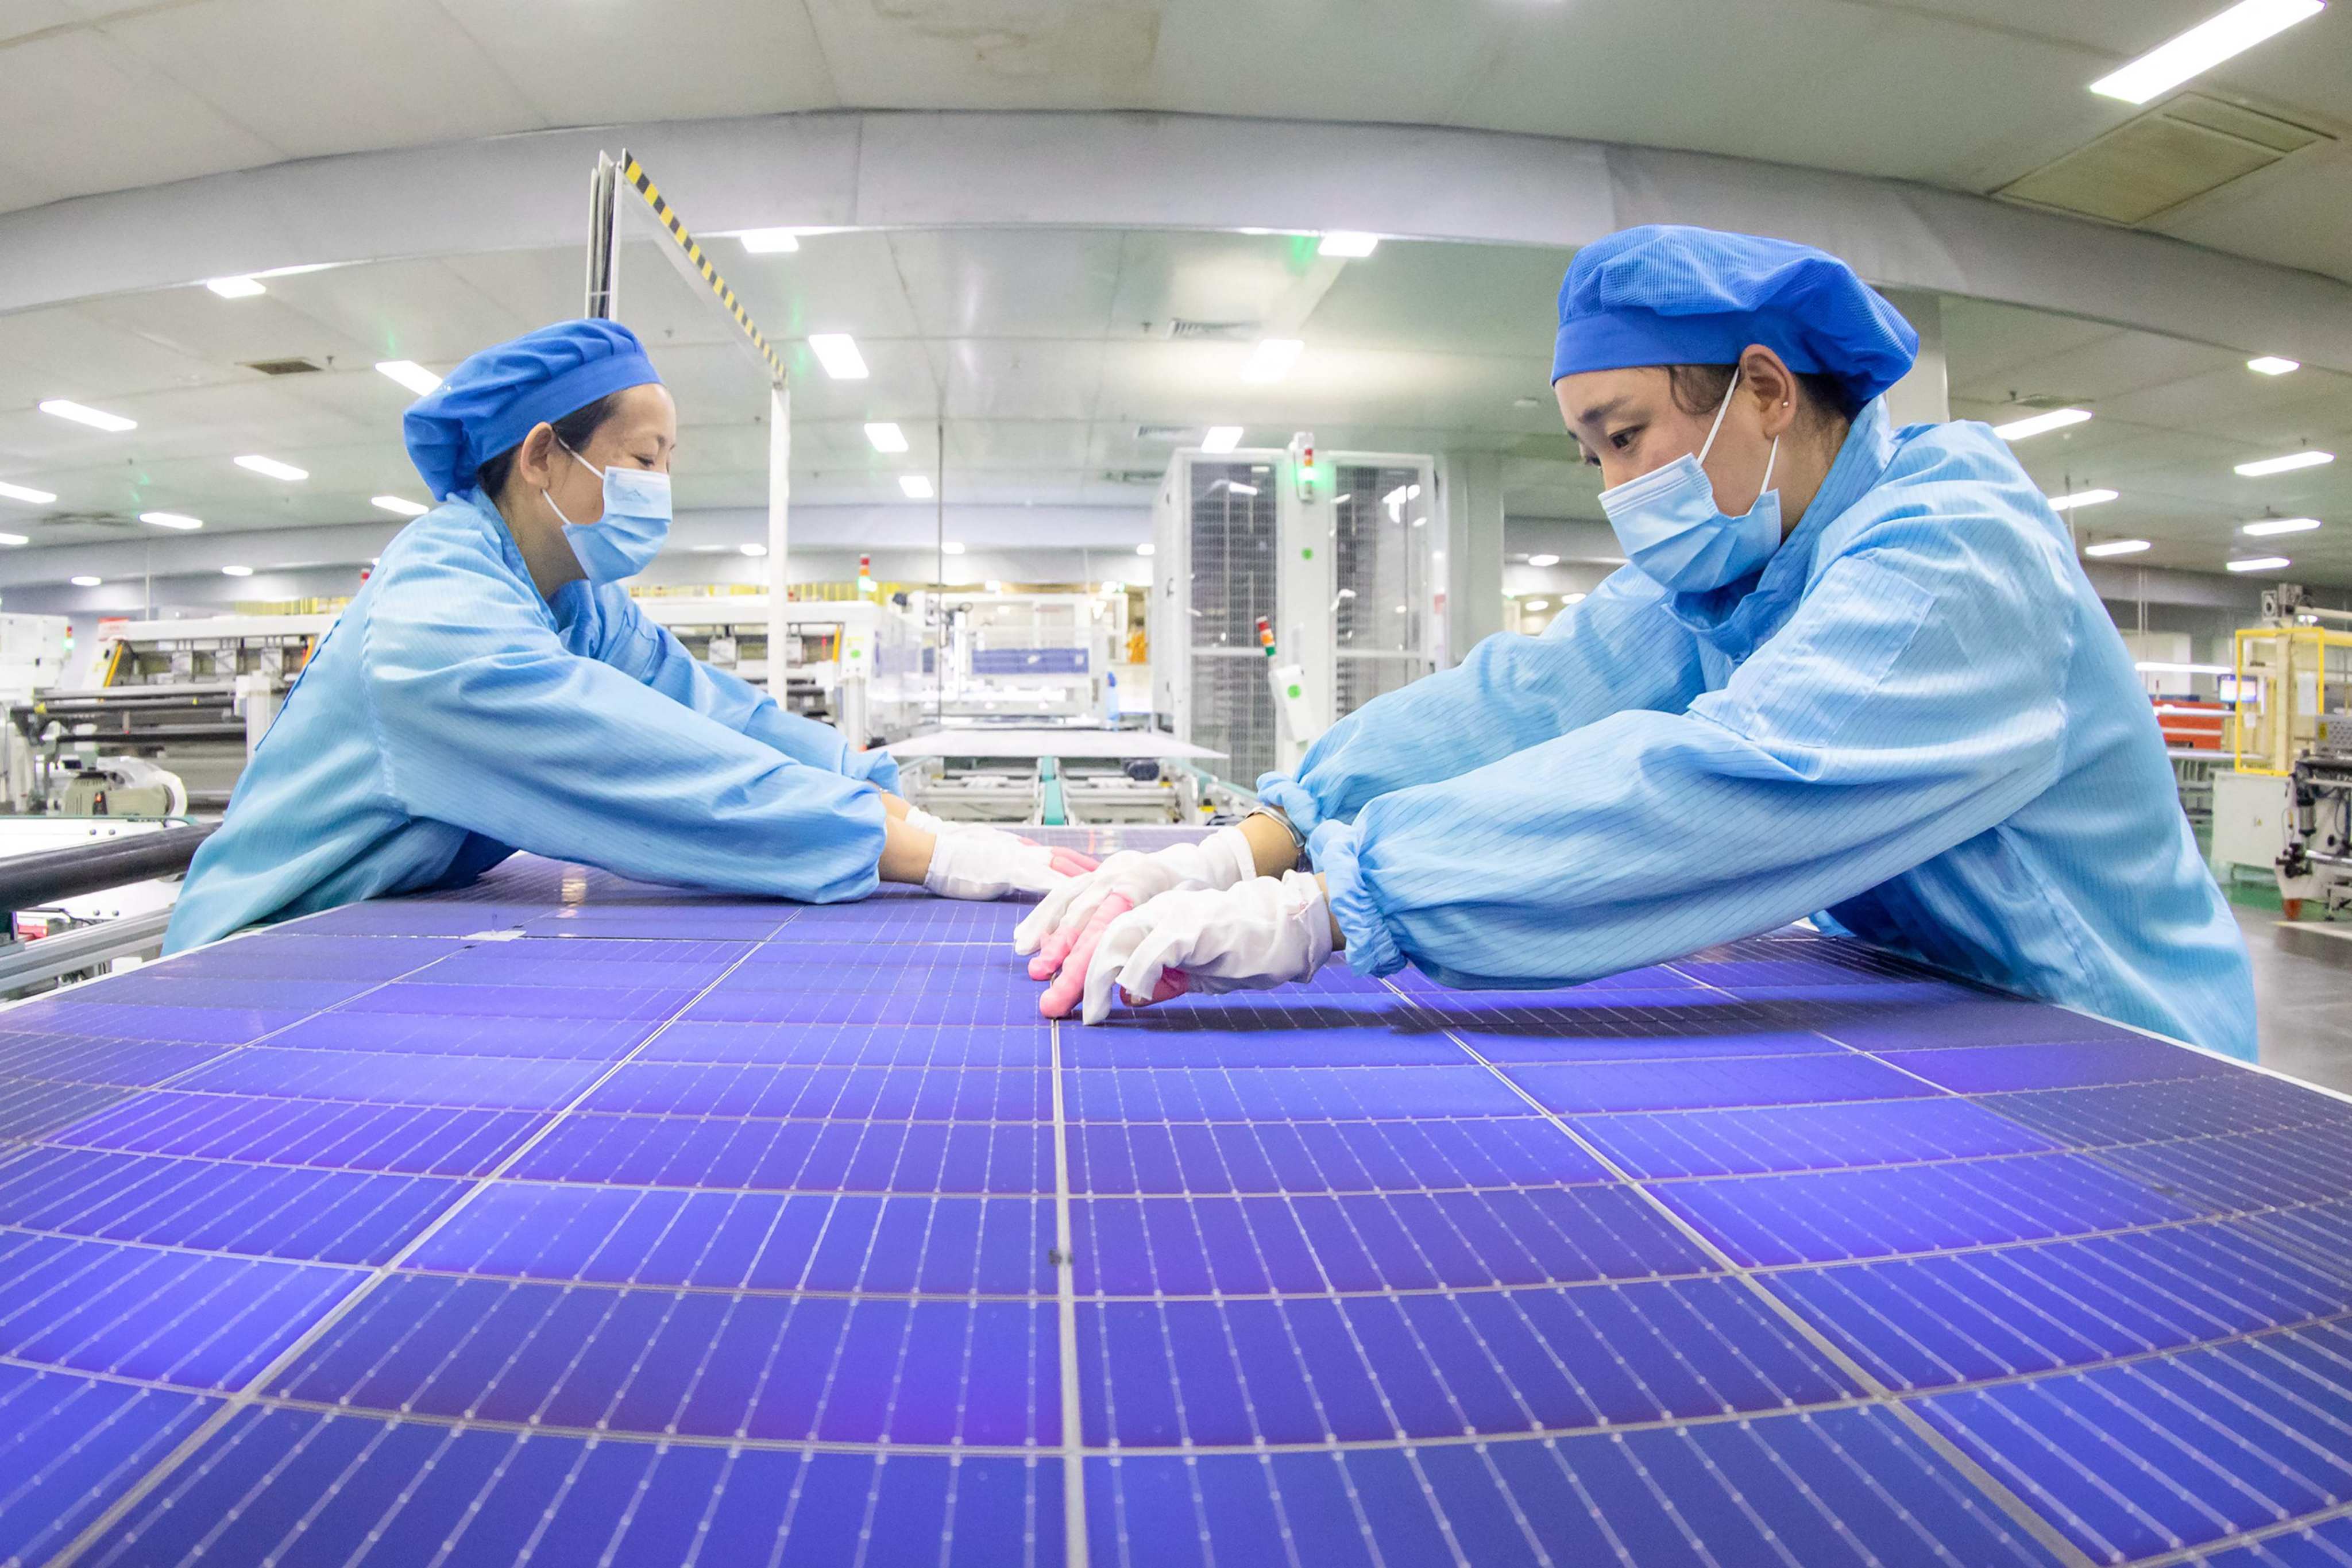 Employees work on solar photovoltaic modules at a factory in China’s Jiangsu province last month. Much of the power generated by solar panels scattered across residents’ rooftops currently cannot be transmitted to a power grid. Photo: AFP